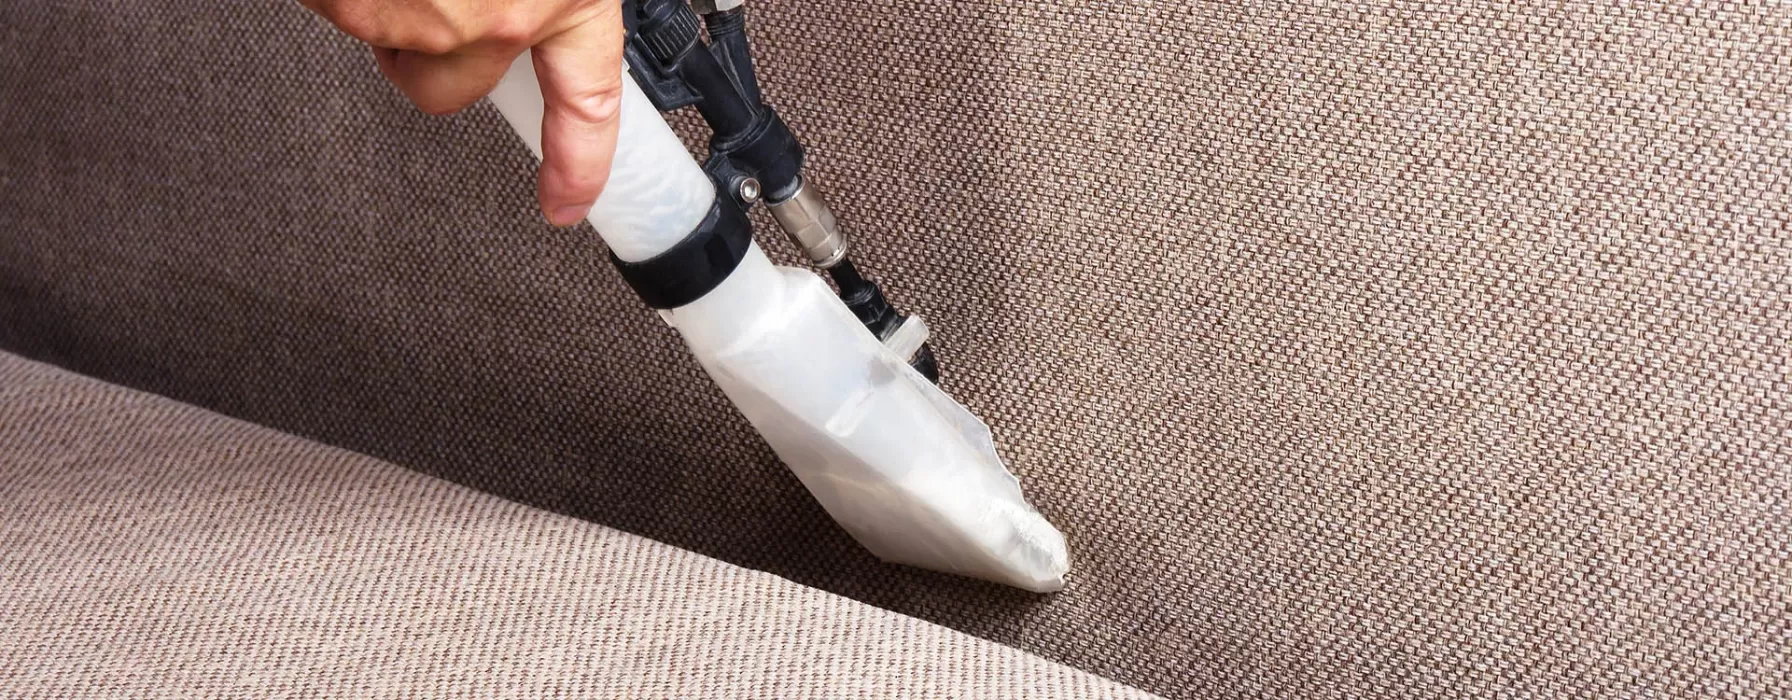 Professional Carpet Cleaning Royal Palm Beach